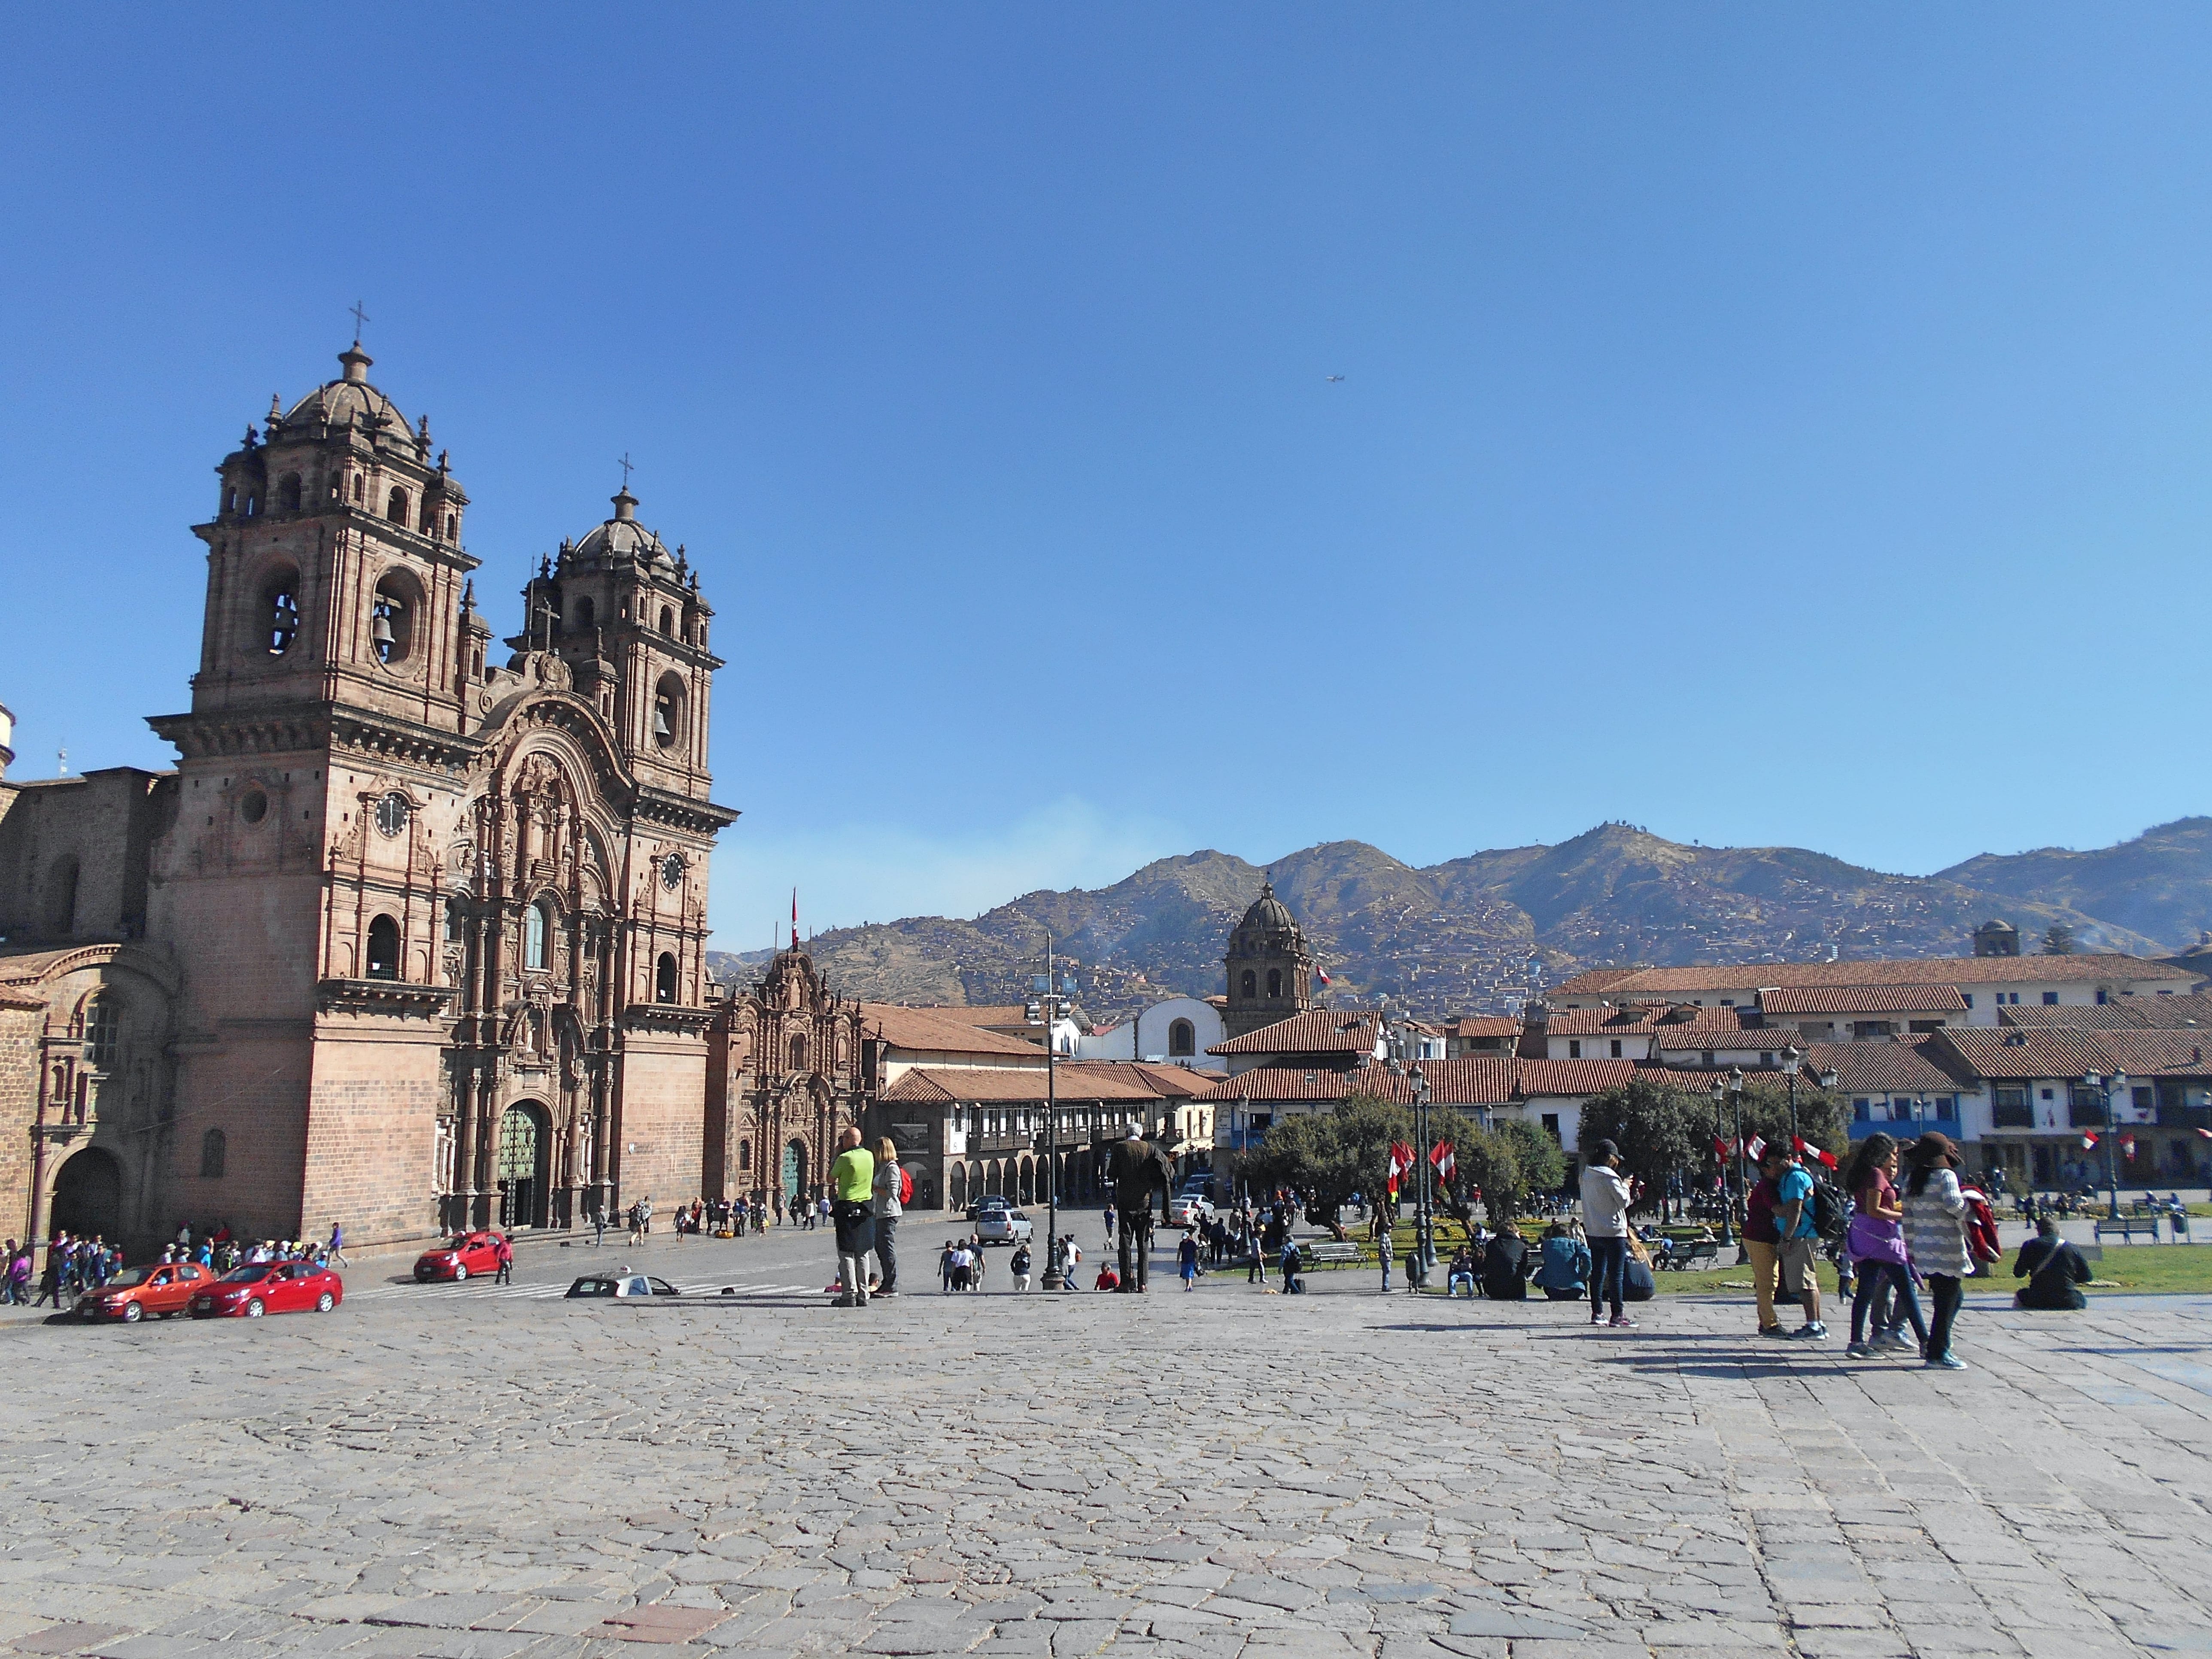 Ancient cathedral in a town square in cusco